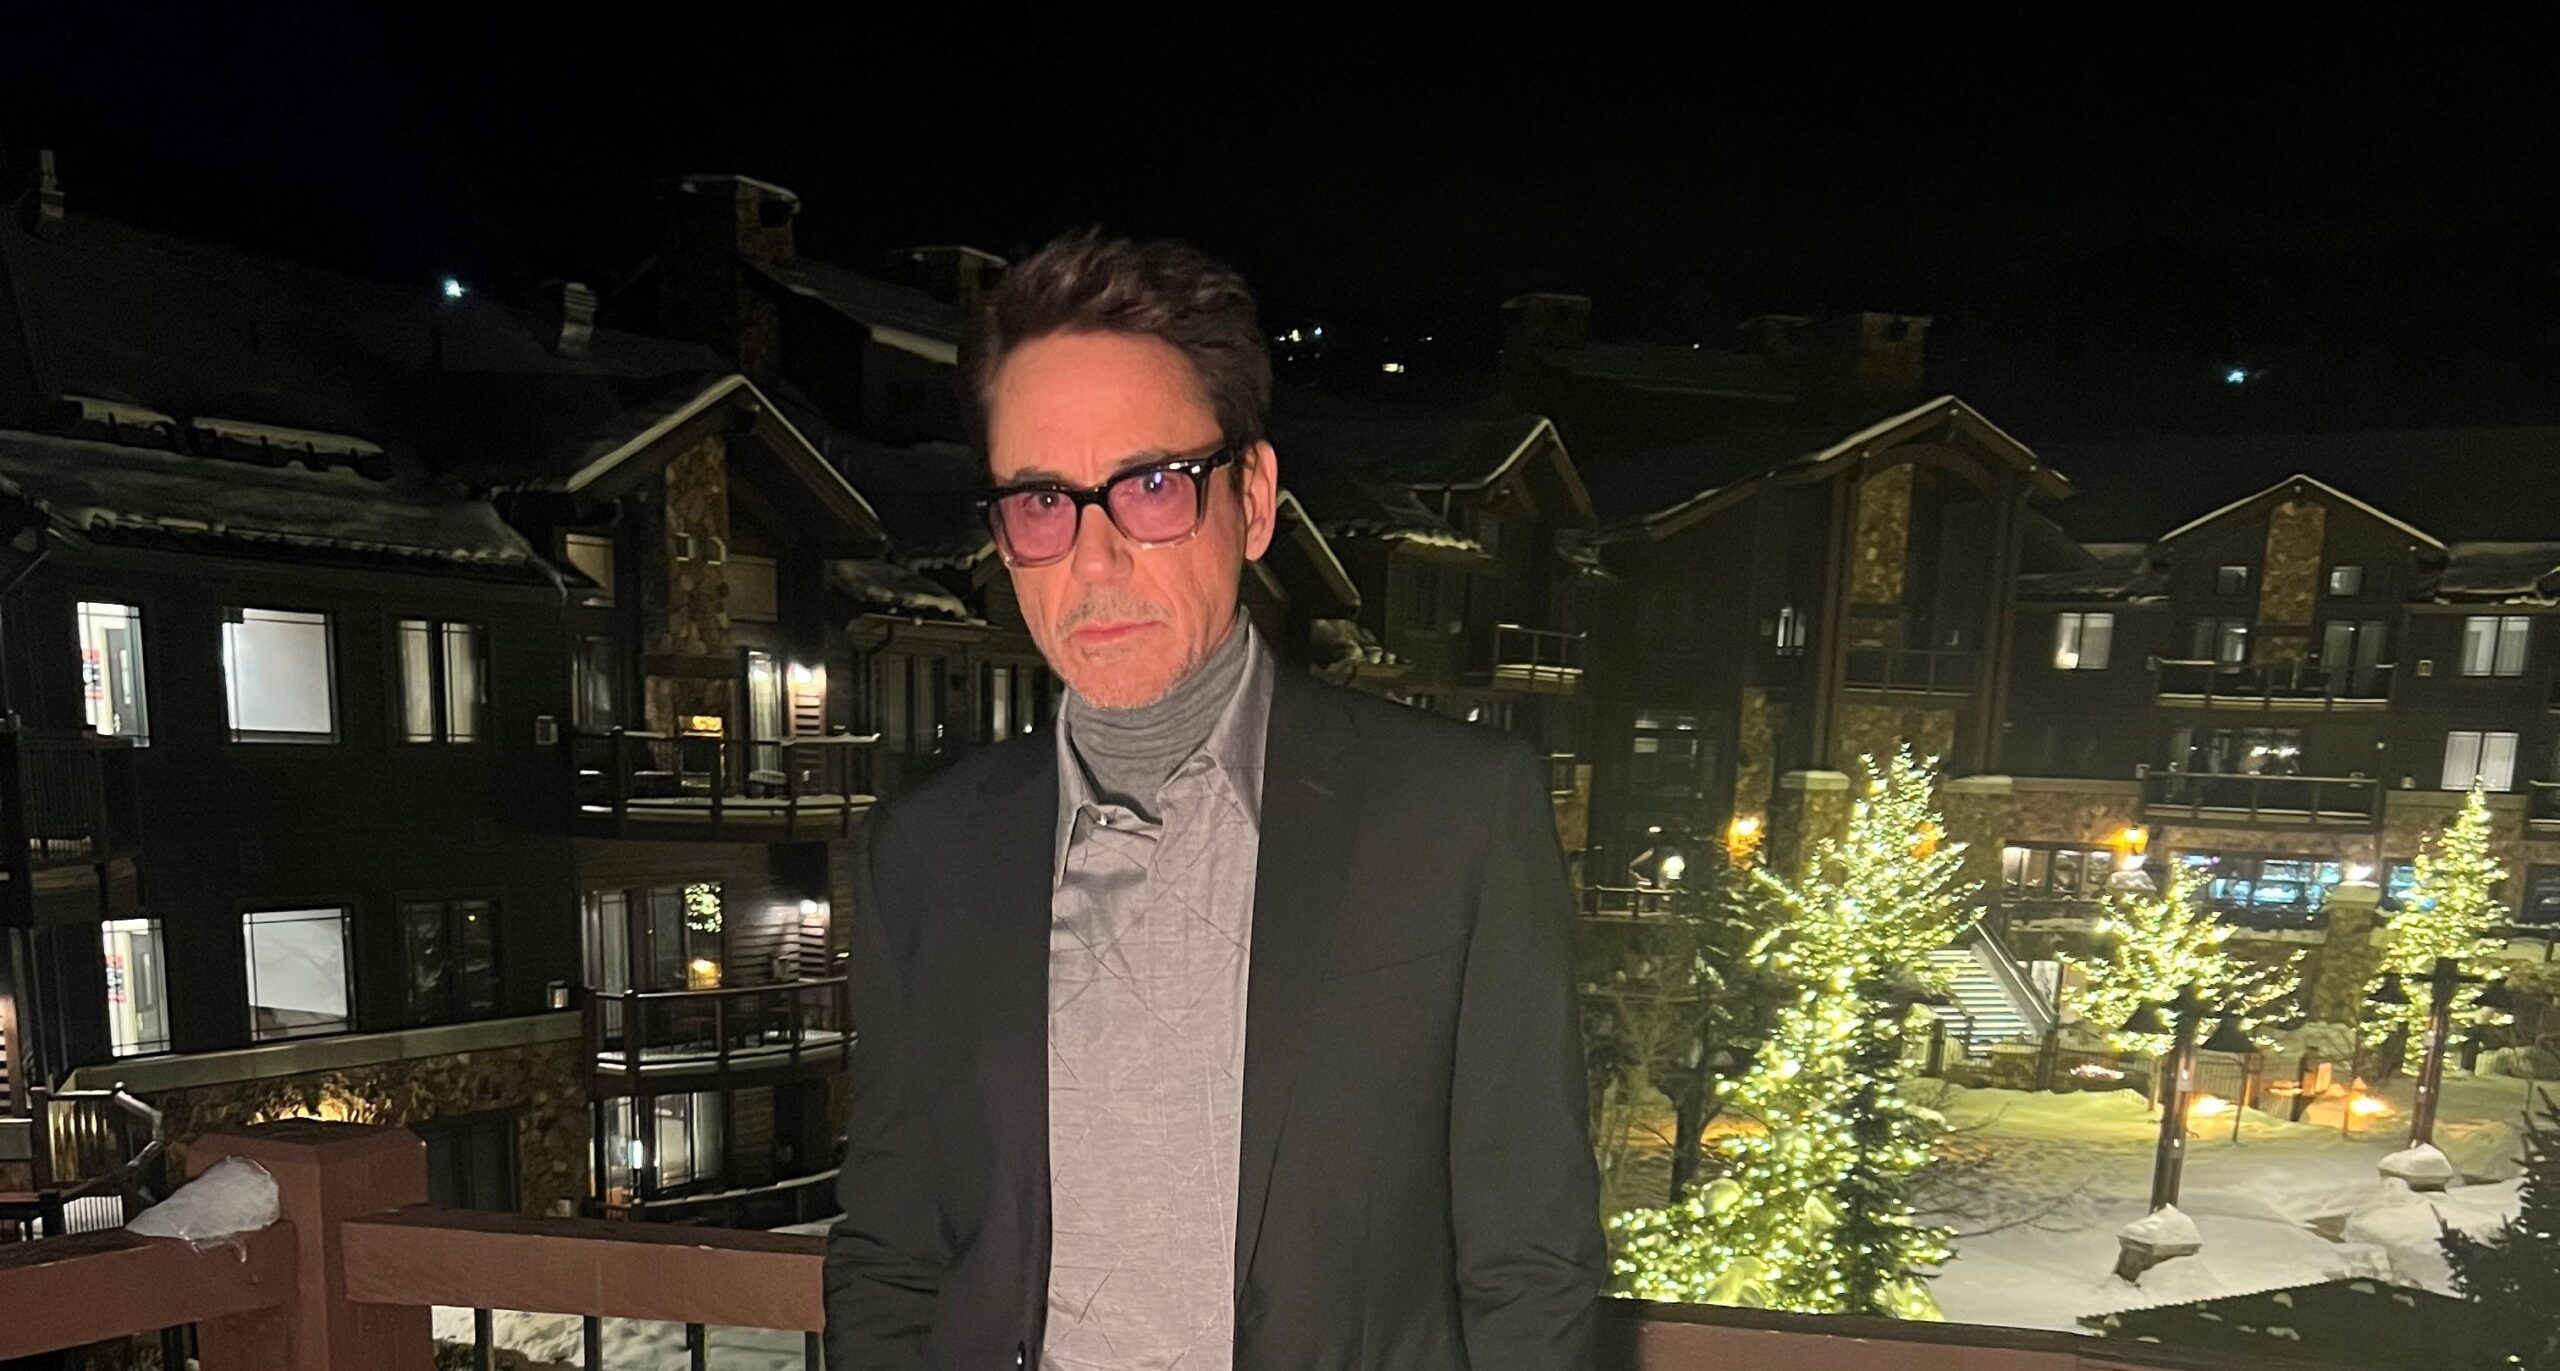 Robert Downey Jr. dressed in Dior at the Sundance Film Festival, posing on a balcony with a snowy evening backdrop.